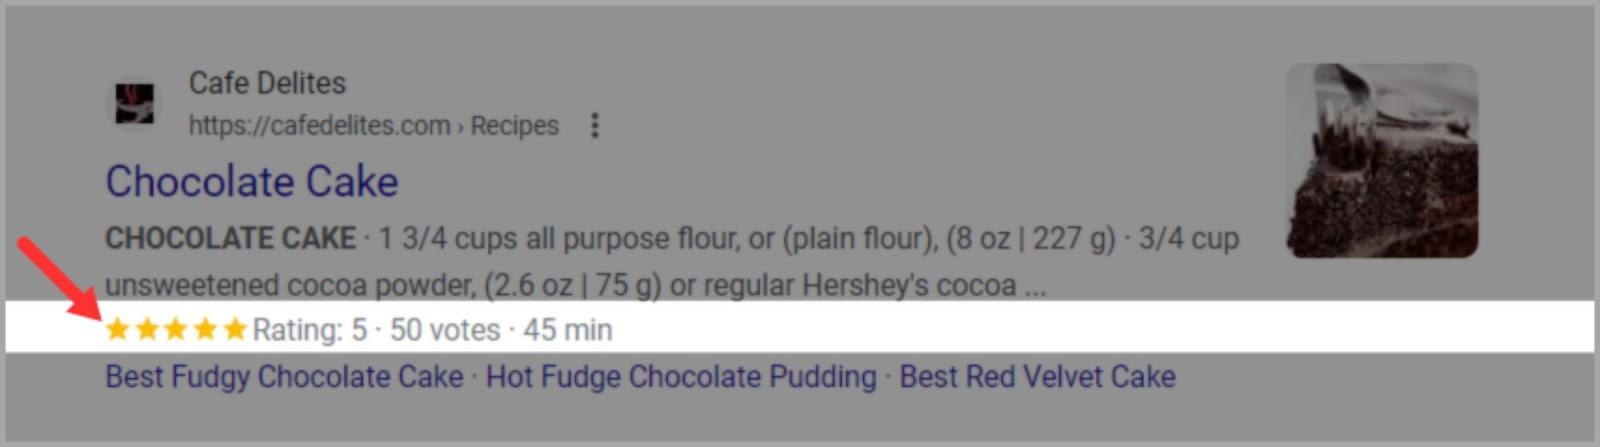 Rich snippet for a chocolate cake recipe